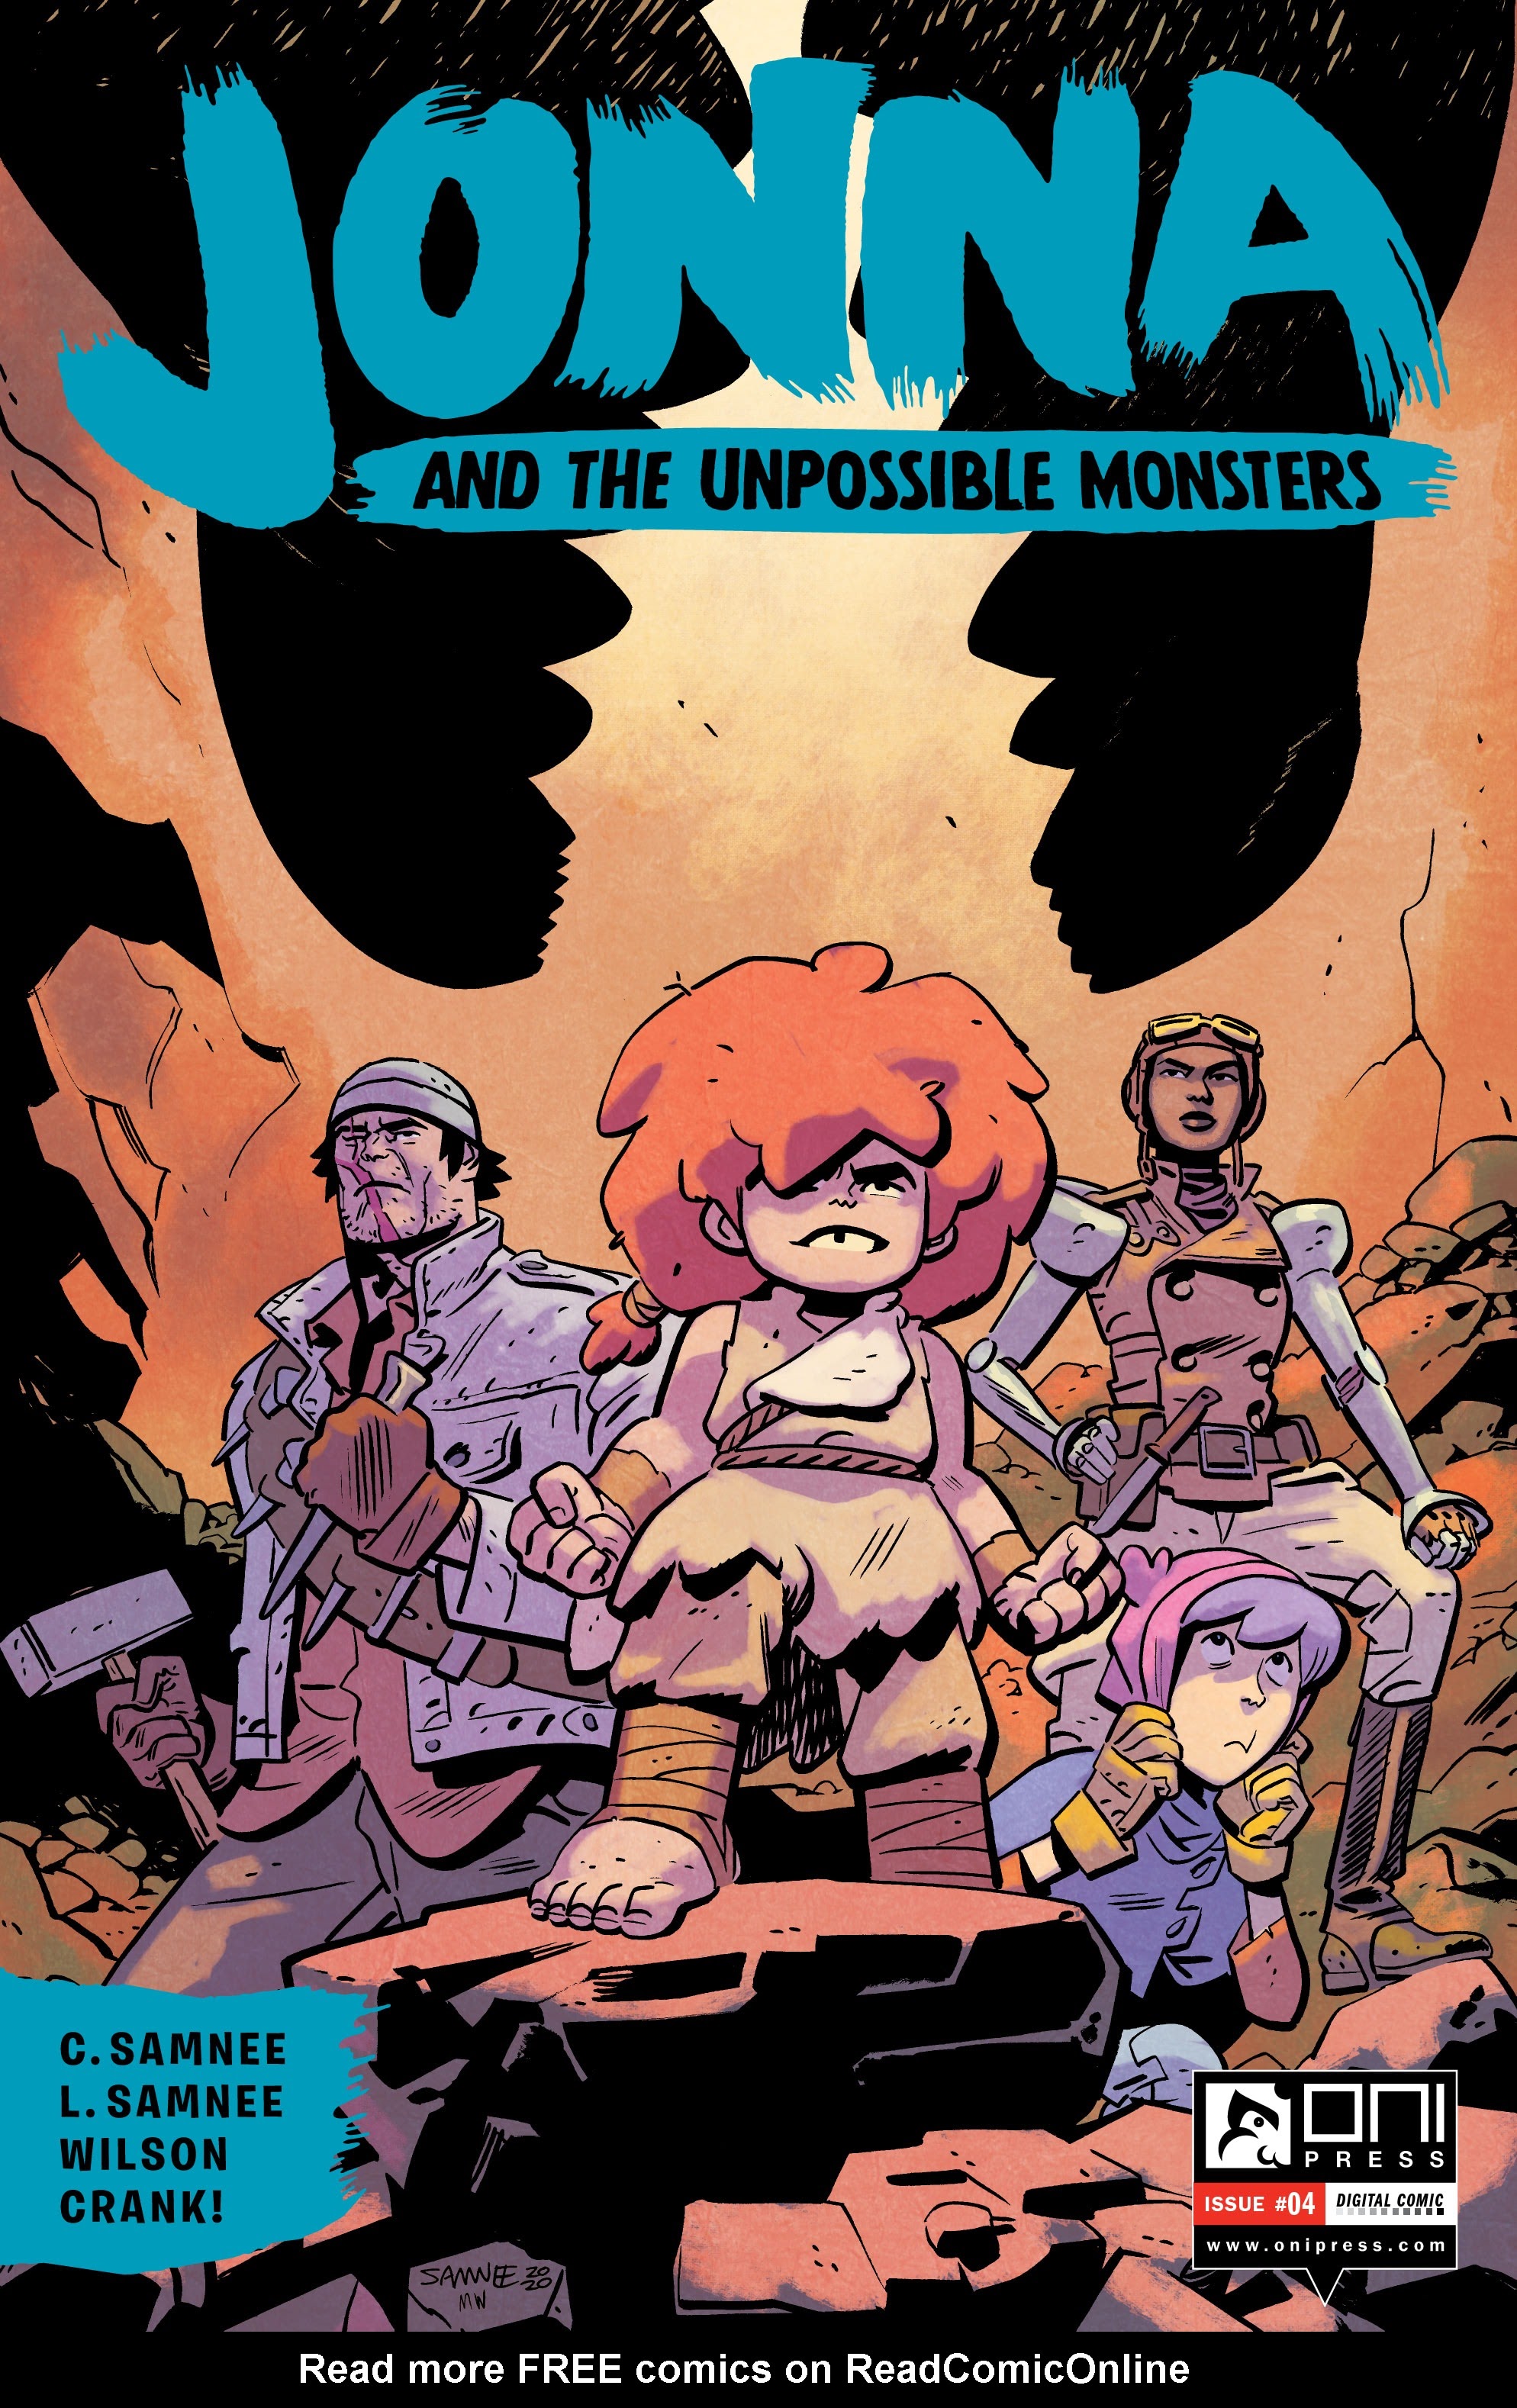 Read online Jonna and the Unpossible Monsters comic -  Issue #4 - 1